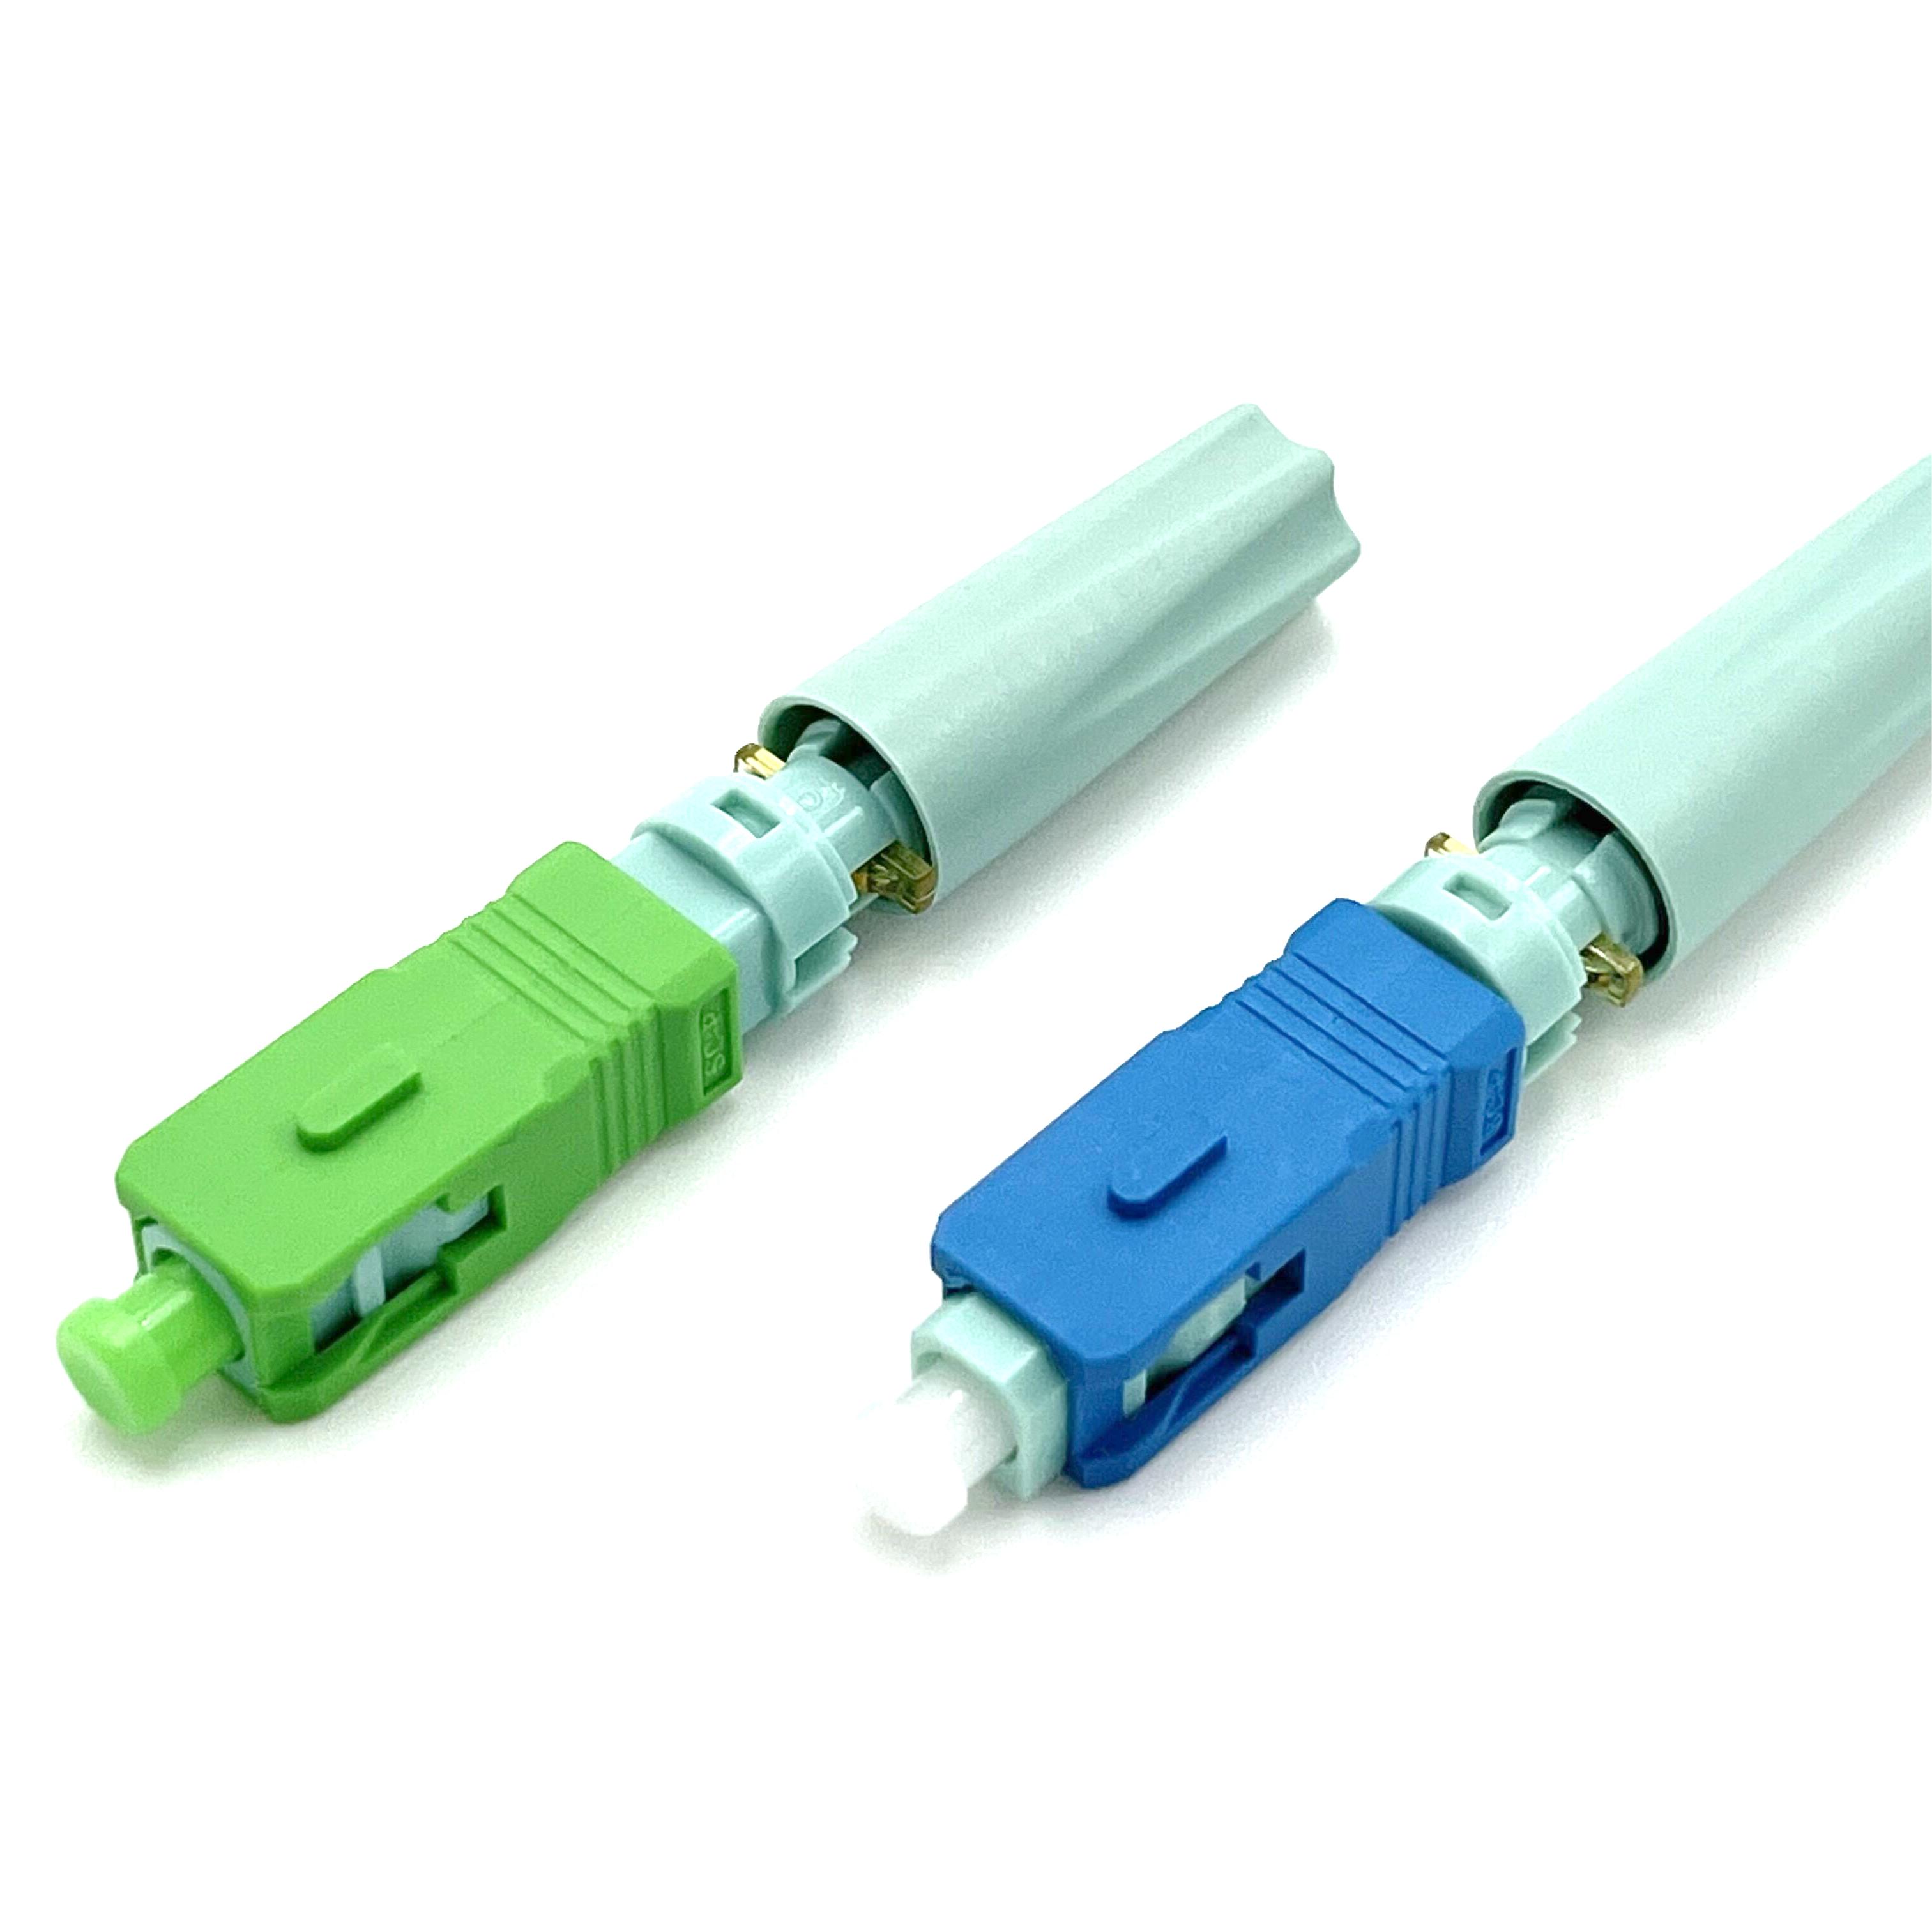 10 TYPE FAST FIELD CONNECTOR